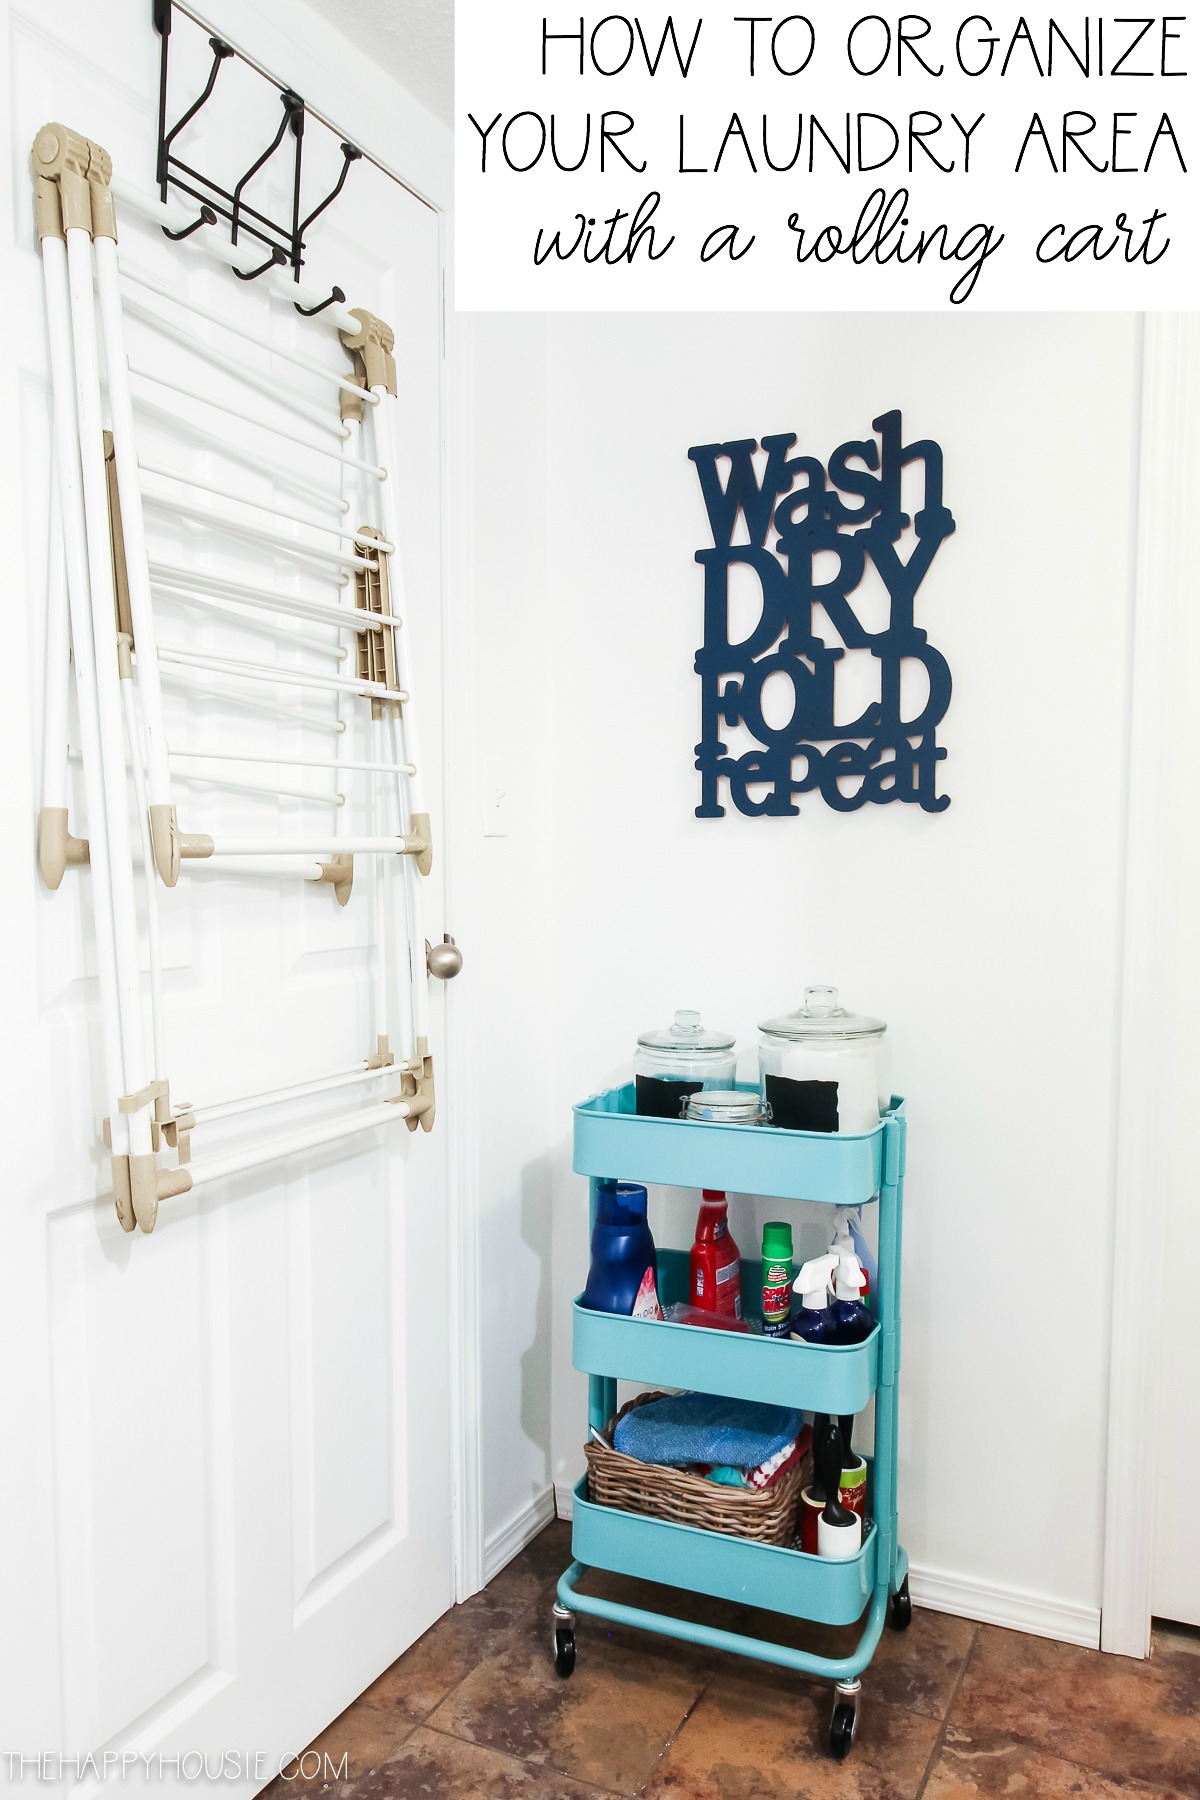 20+ Brilliant Ideas For Organizing Small Spaces - Jenna Kate at Home